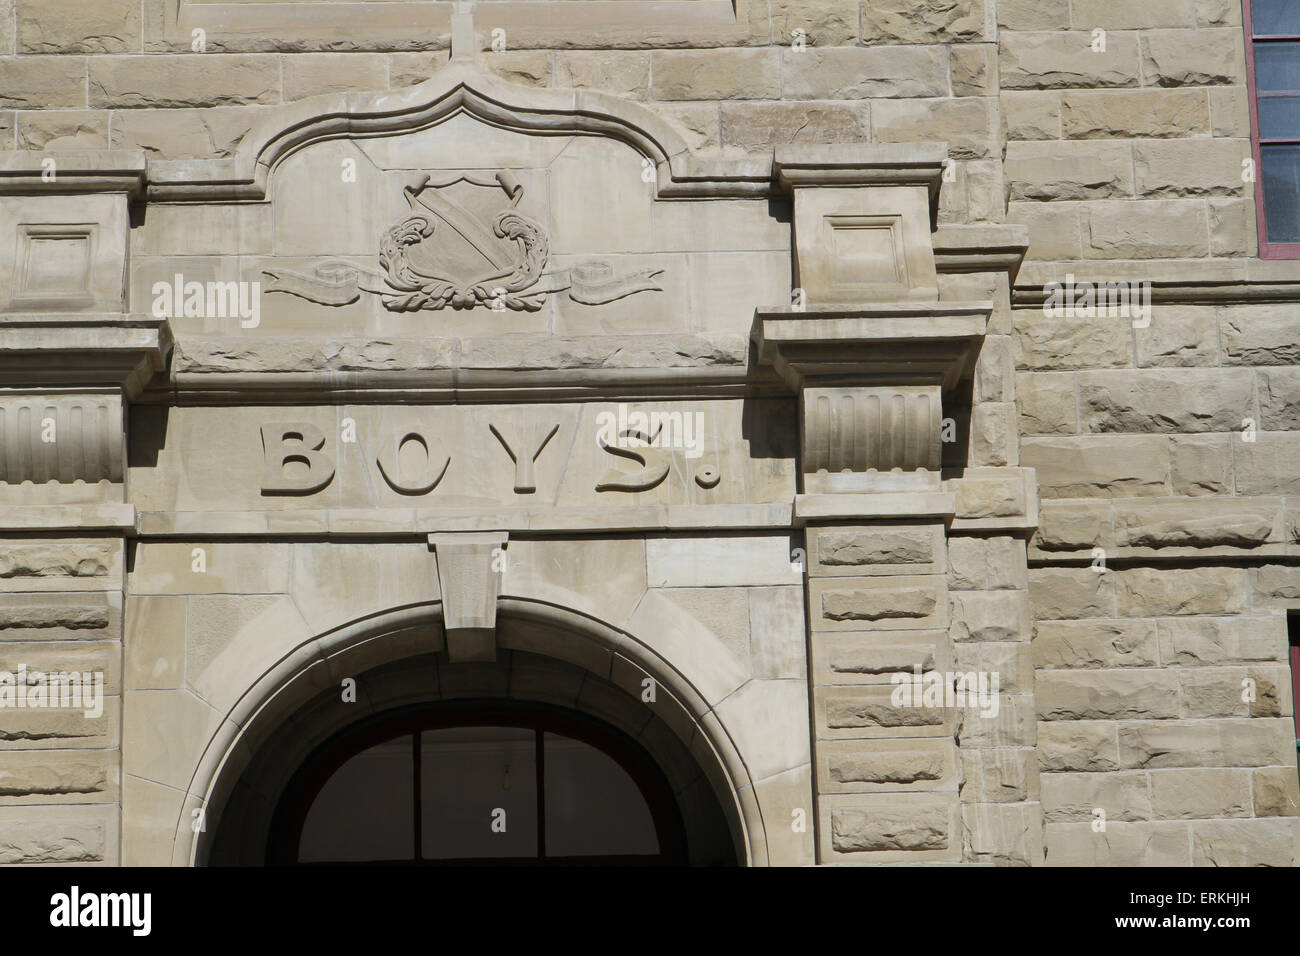 Sandstone school building with separate boys and girls entrances Stock Photo